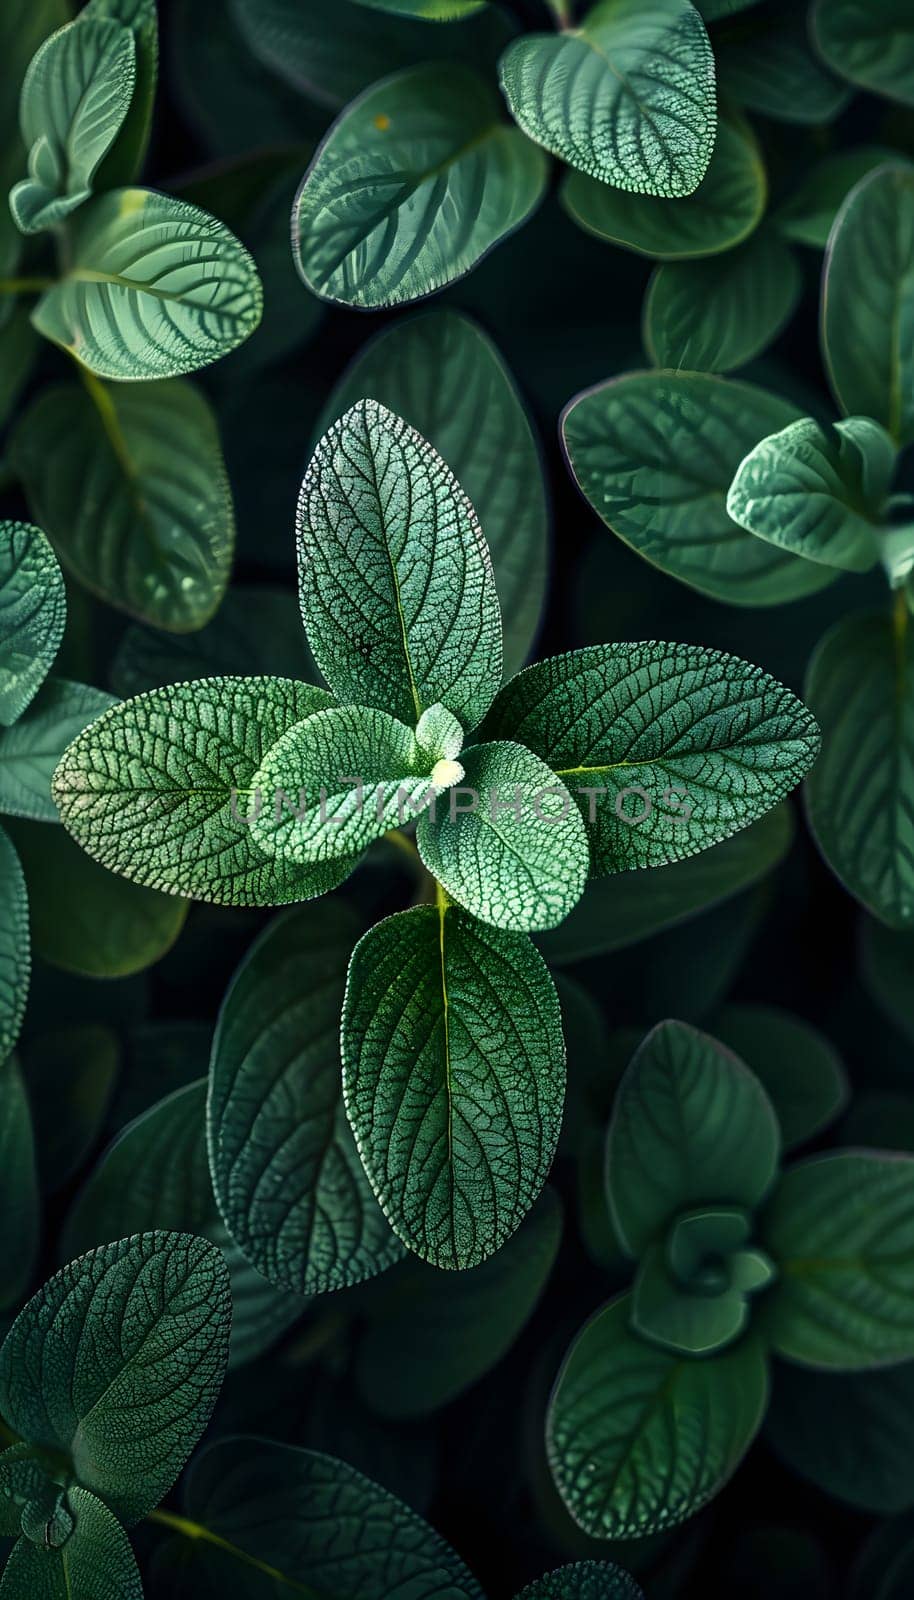 A closeup of a terrestrial plant with green leaves, possibly a subshrub or herb, set against a dark background showcasing its botany and texture